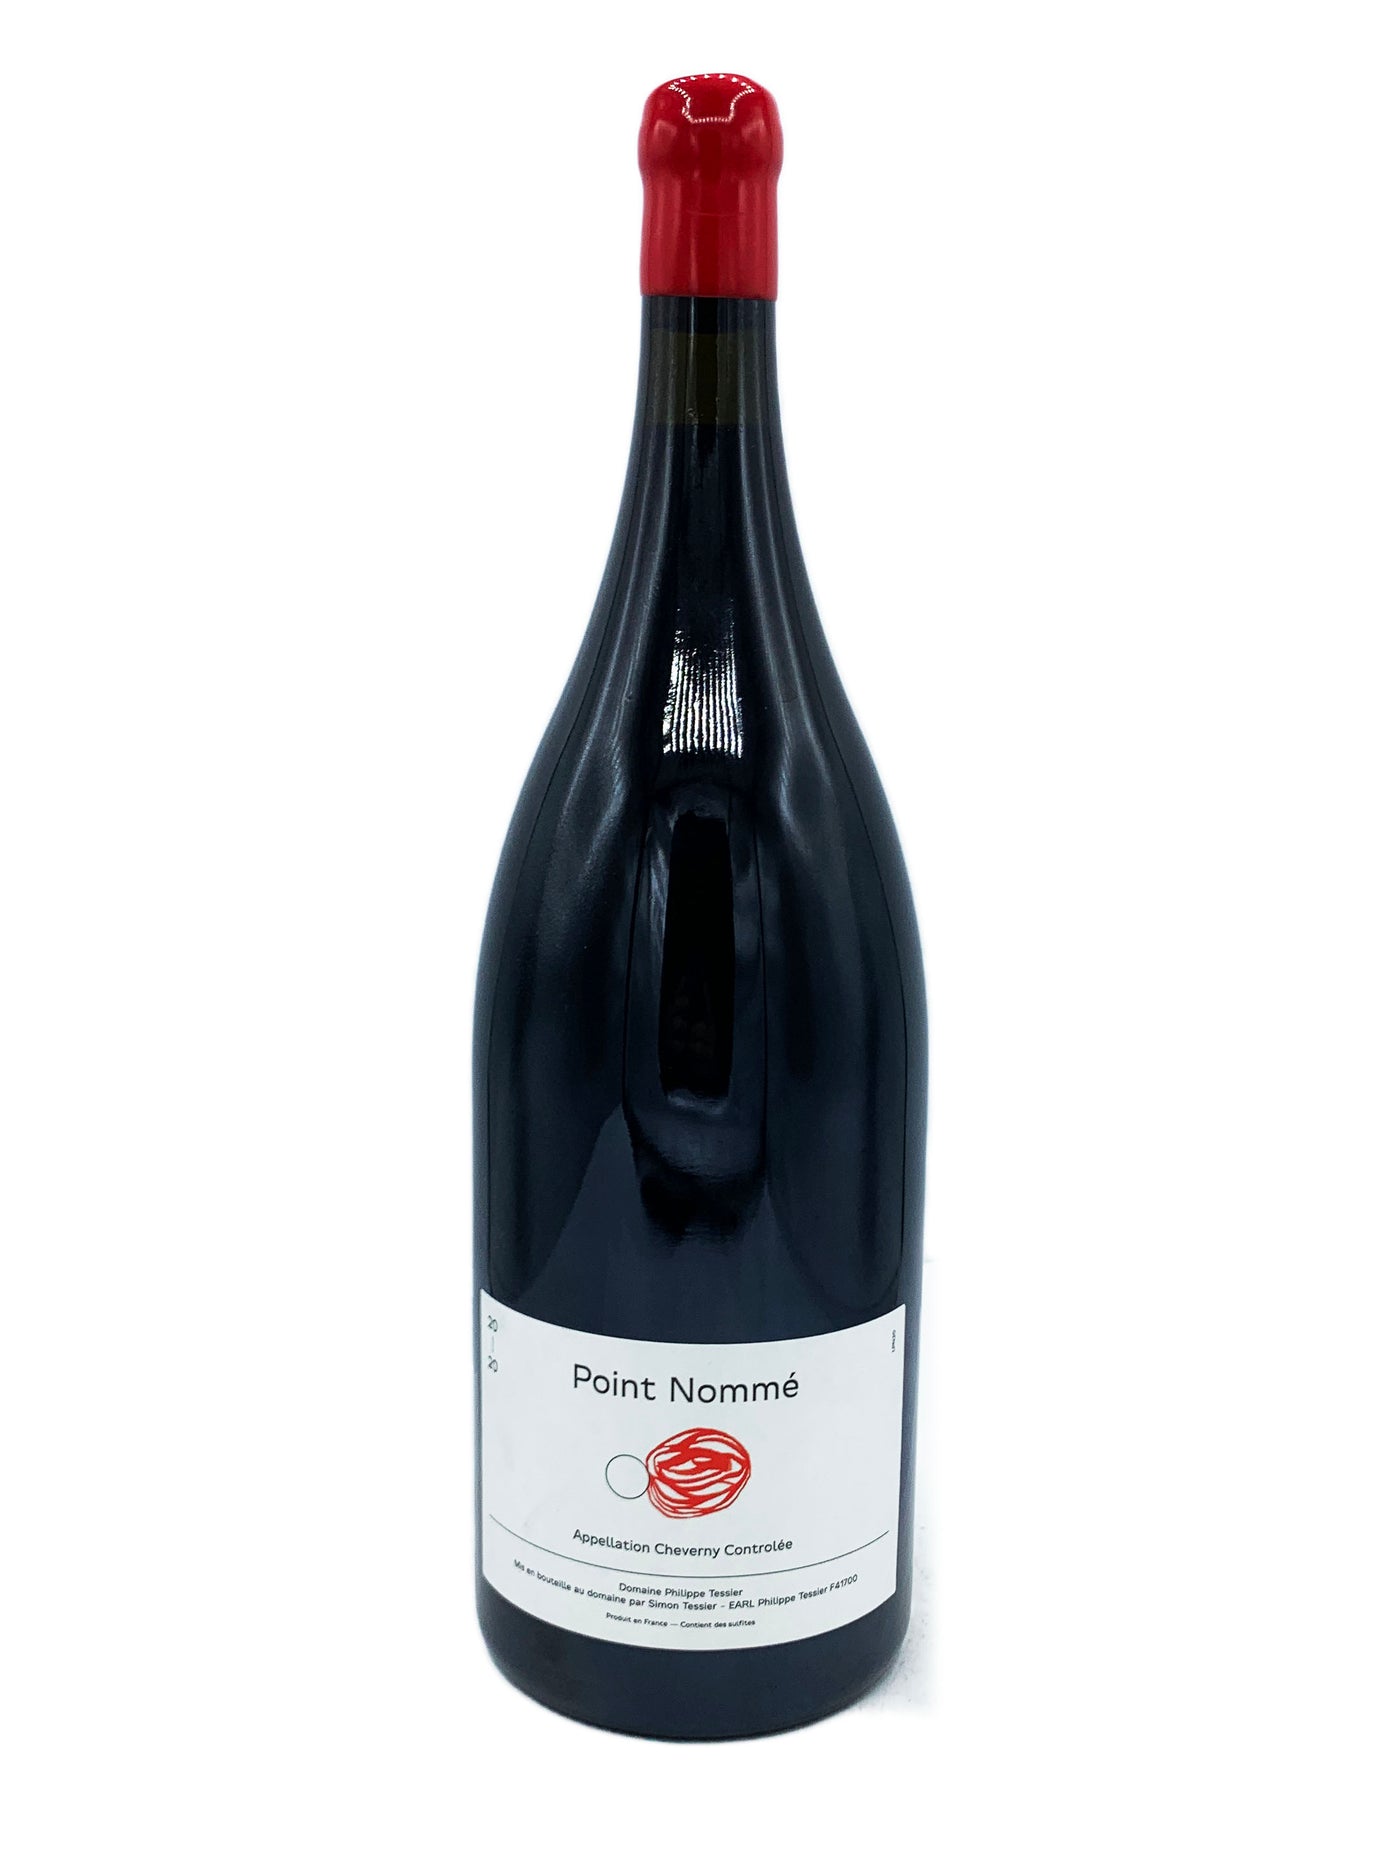 Philippe Tessier Cheverny Point Nomme MAGNUM 1.5 liter 2020